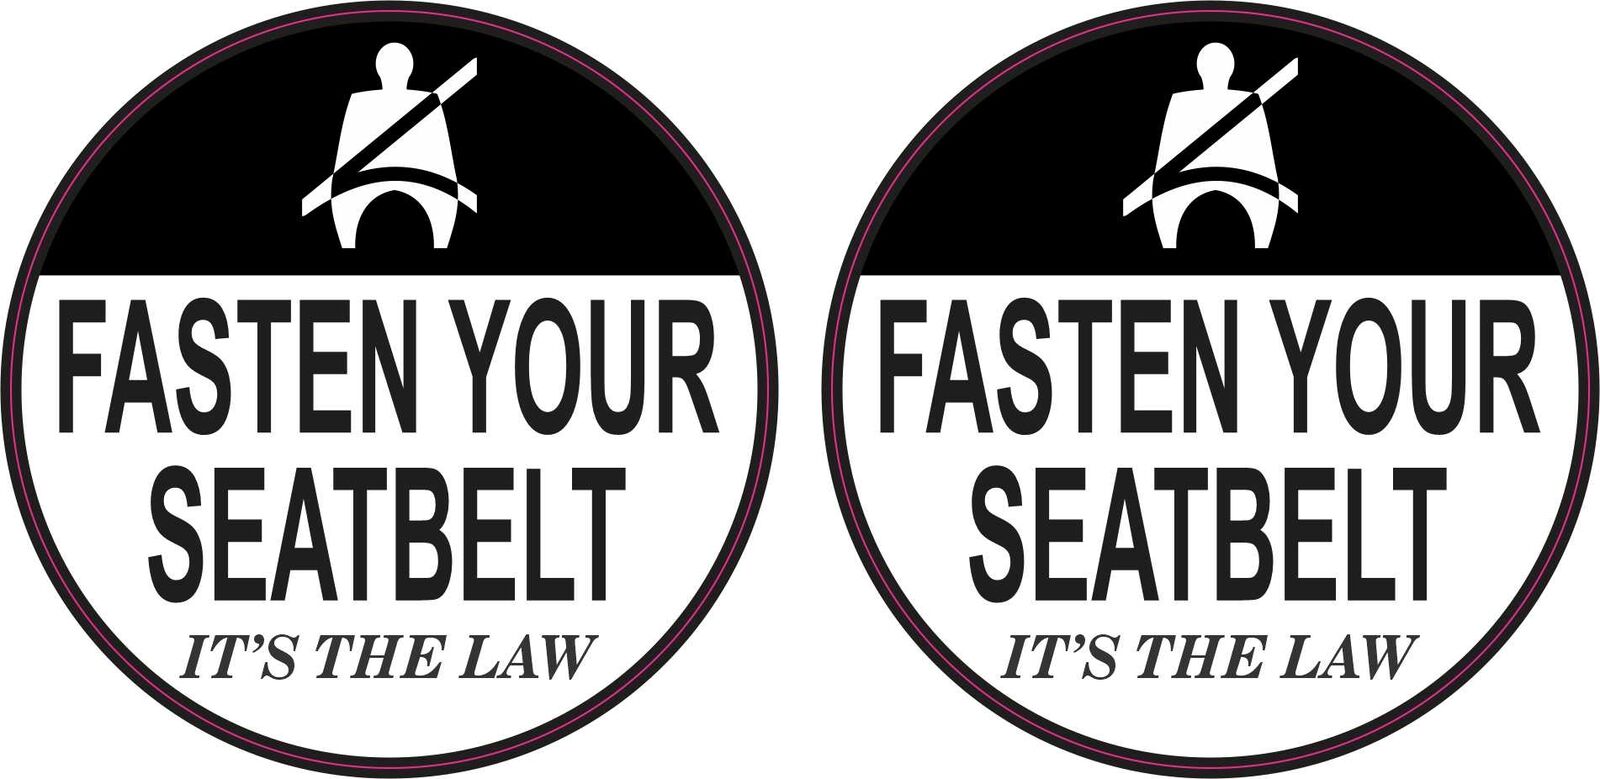 3in x 3in Fasten Your Seatbelt Vinyl Stickers Car Truck Vehicle Safety Decal